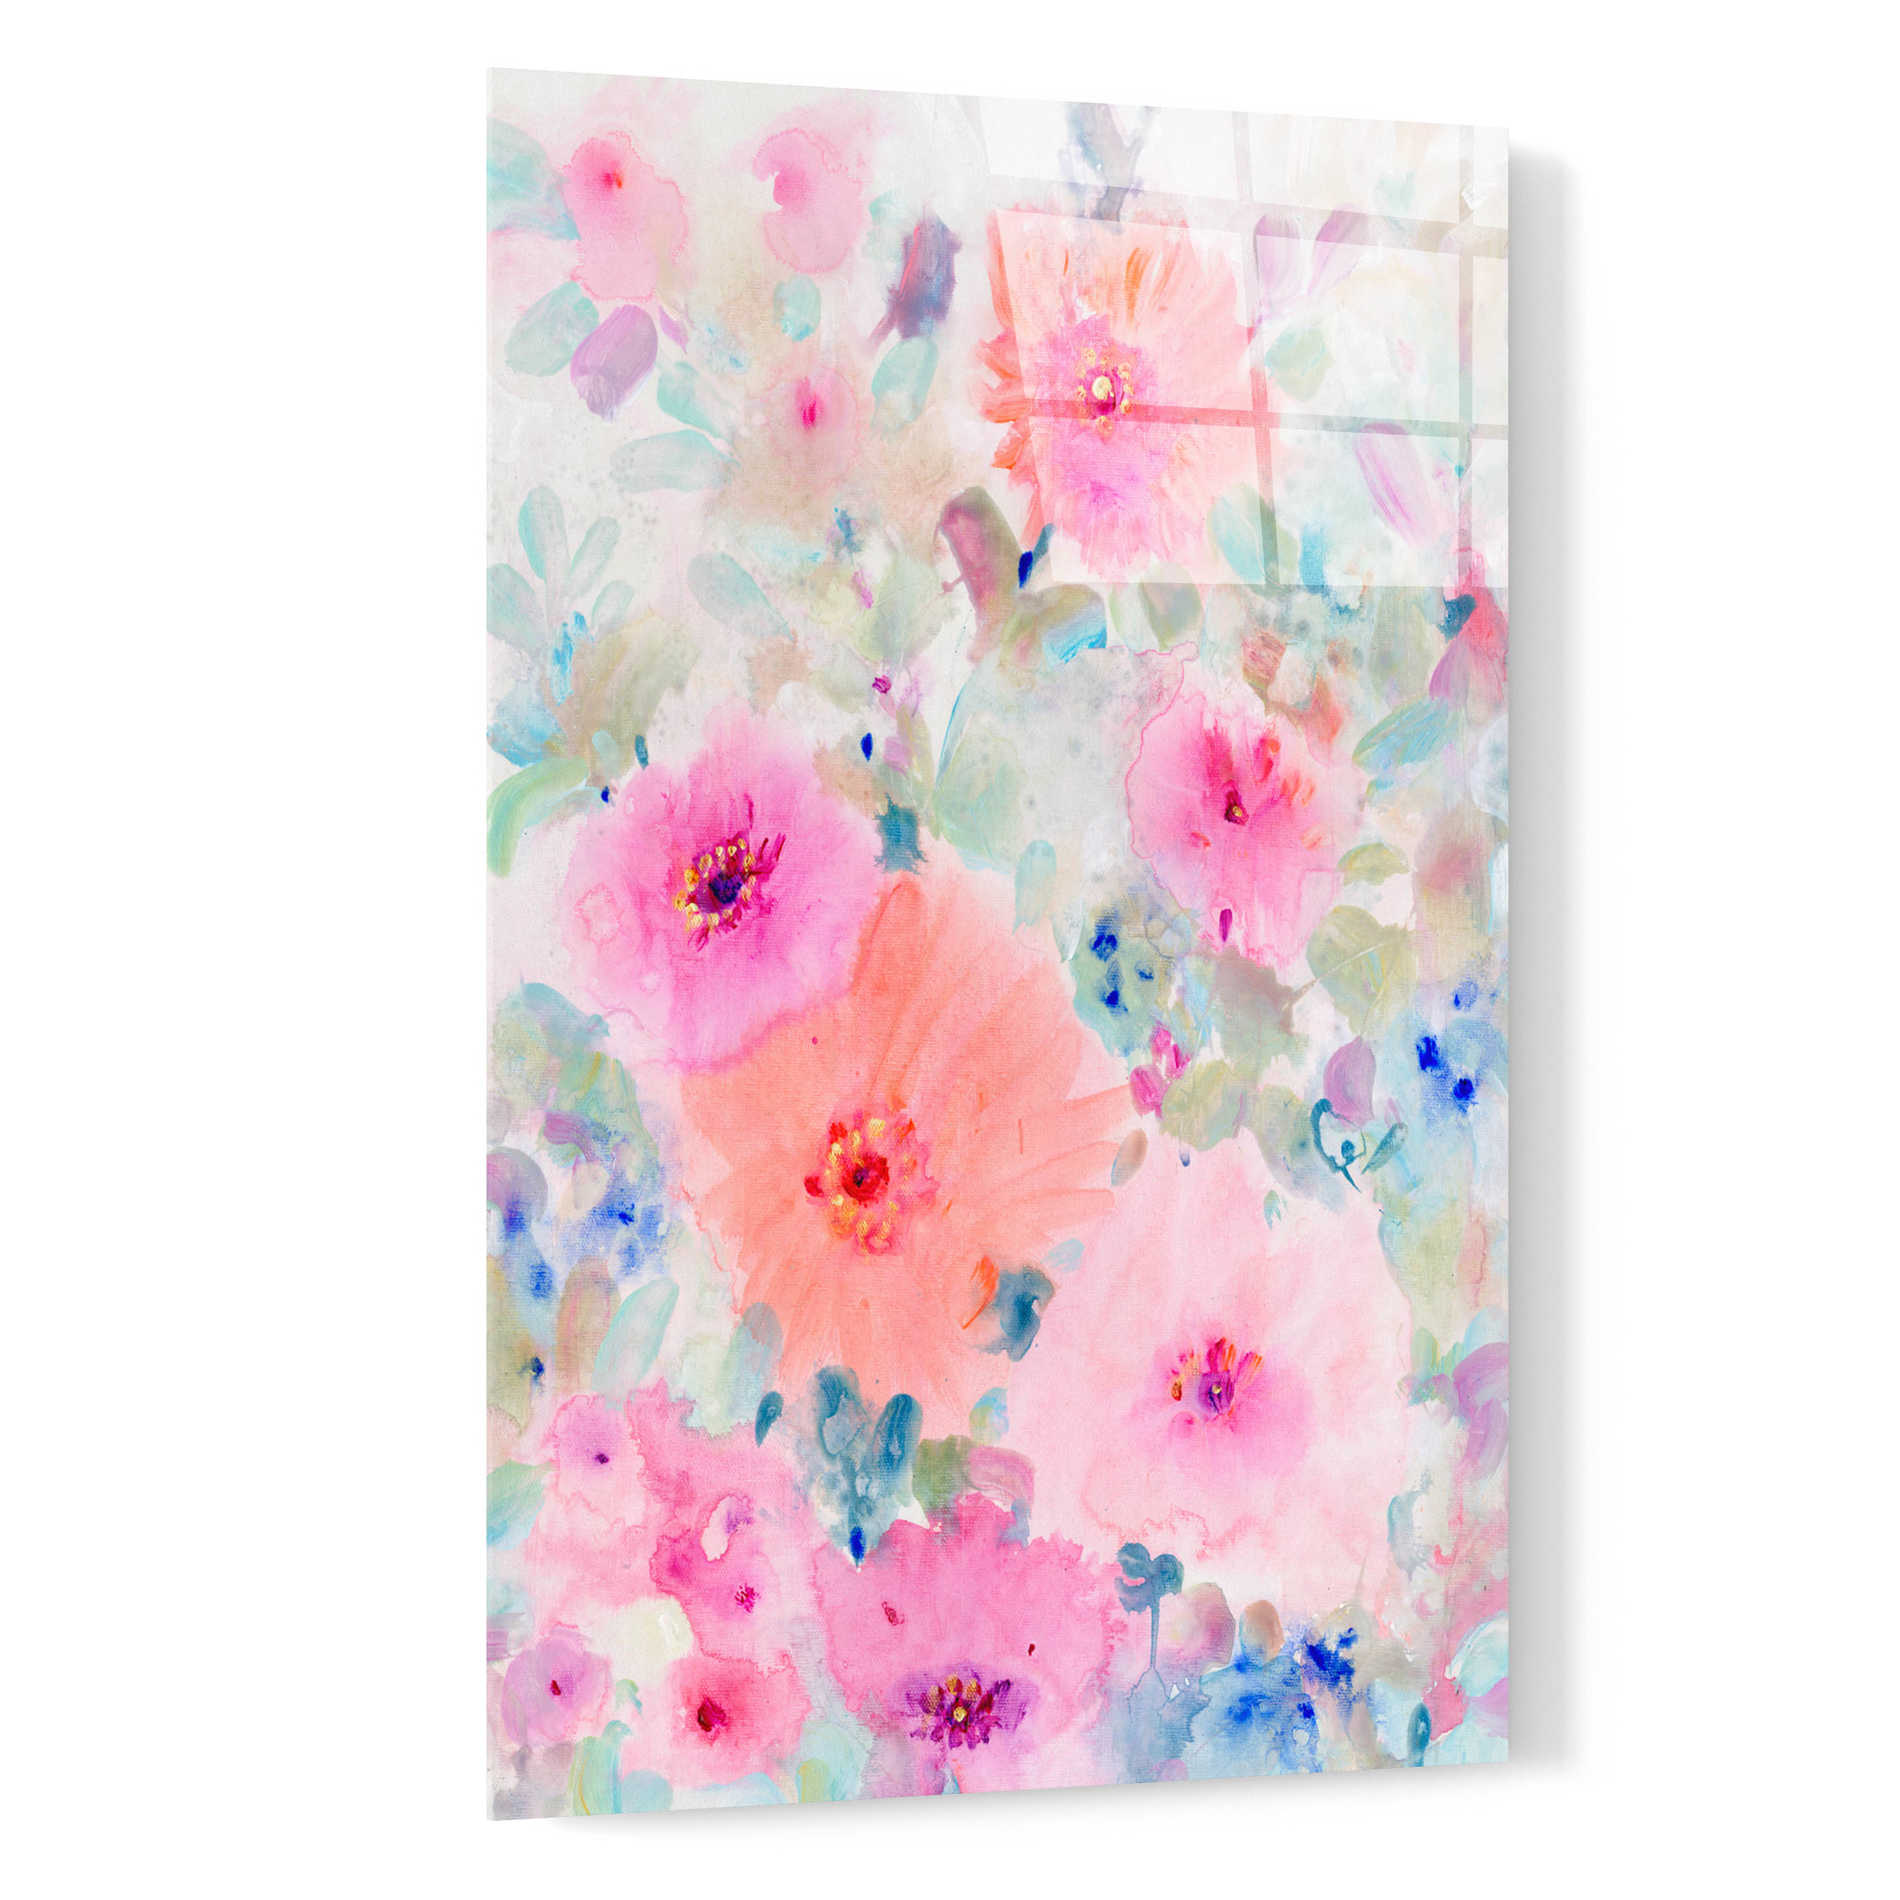 Epic Art 'Bright Floral Design  II' by Tim O'Toole, Acrylic Glass Wall Art,16x24